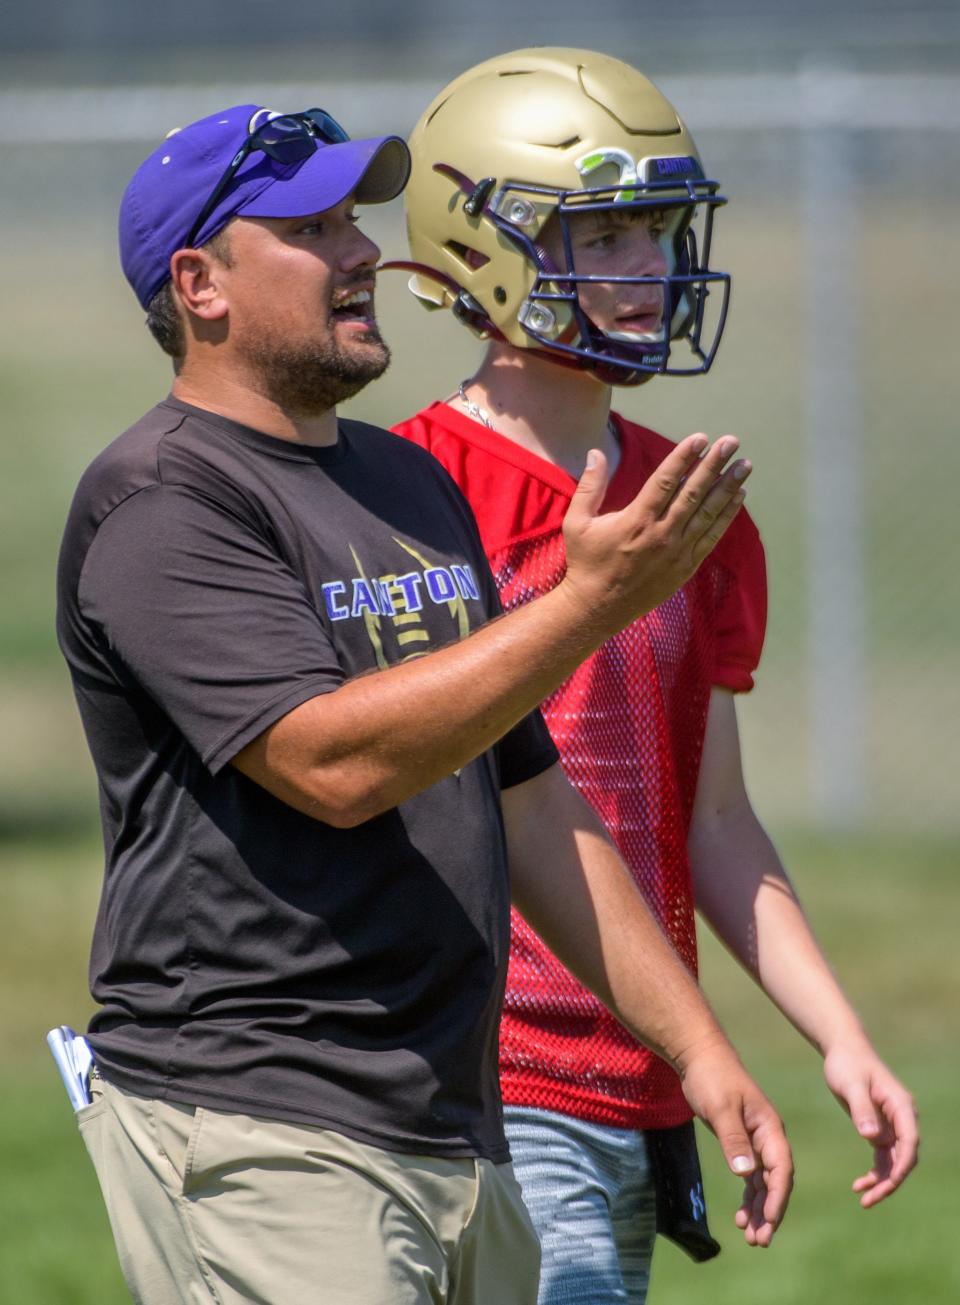 Canton High School head coach Nick Wright directs his players during the 7-on-7 football camp Saturday, July 23, 2022 at Washington Community High School.